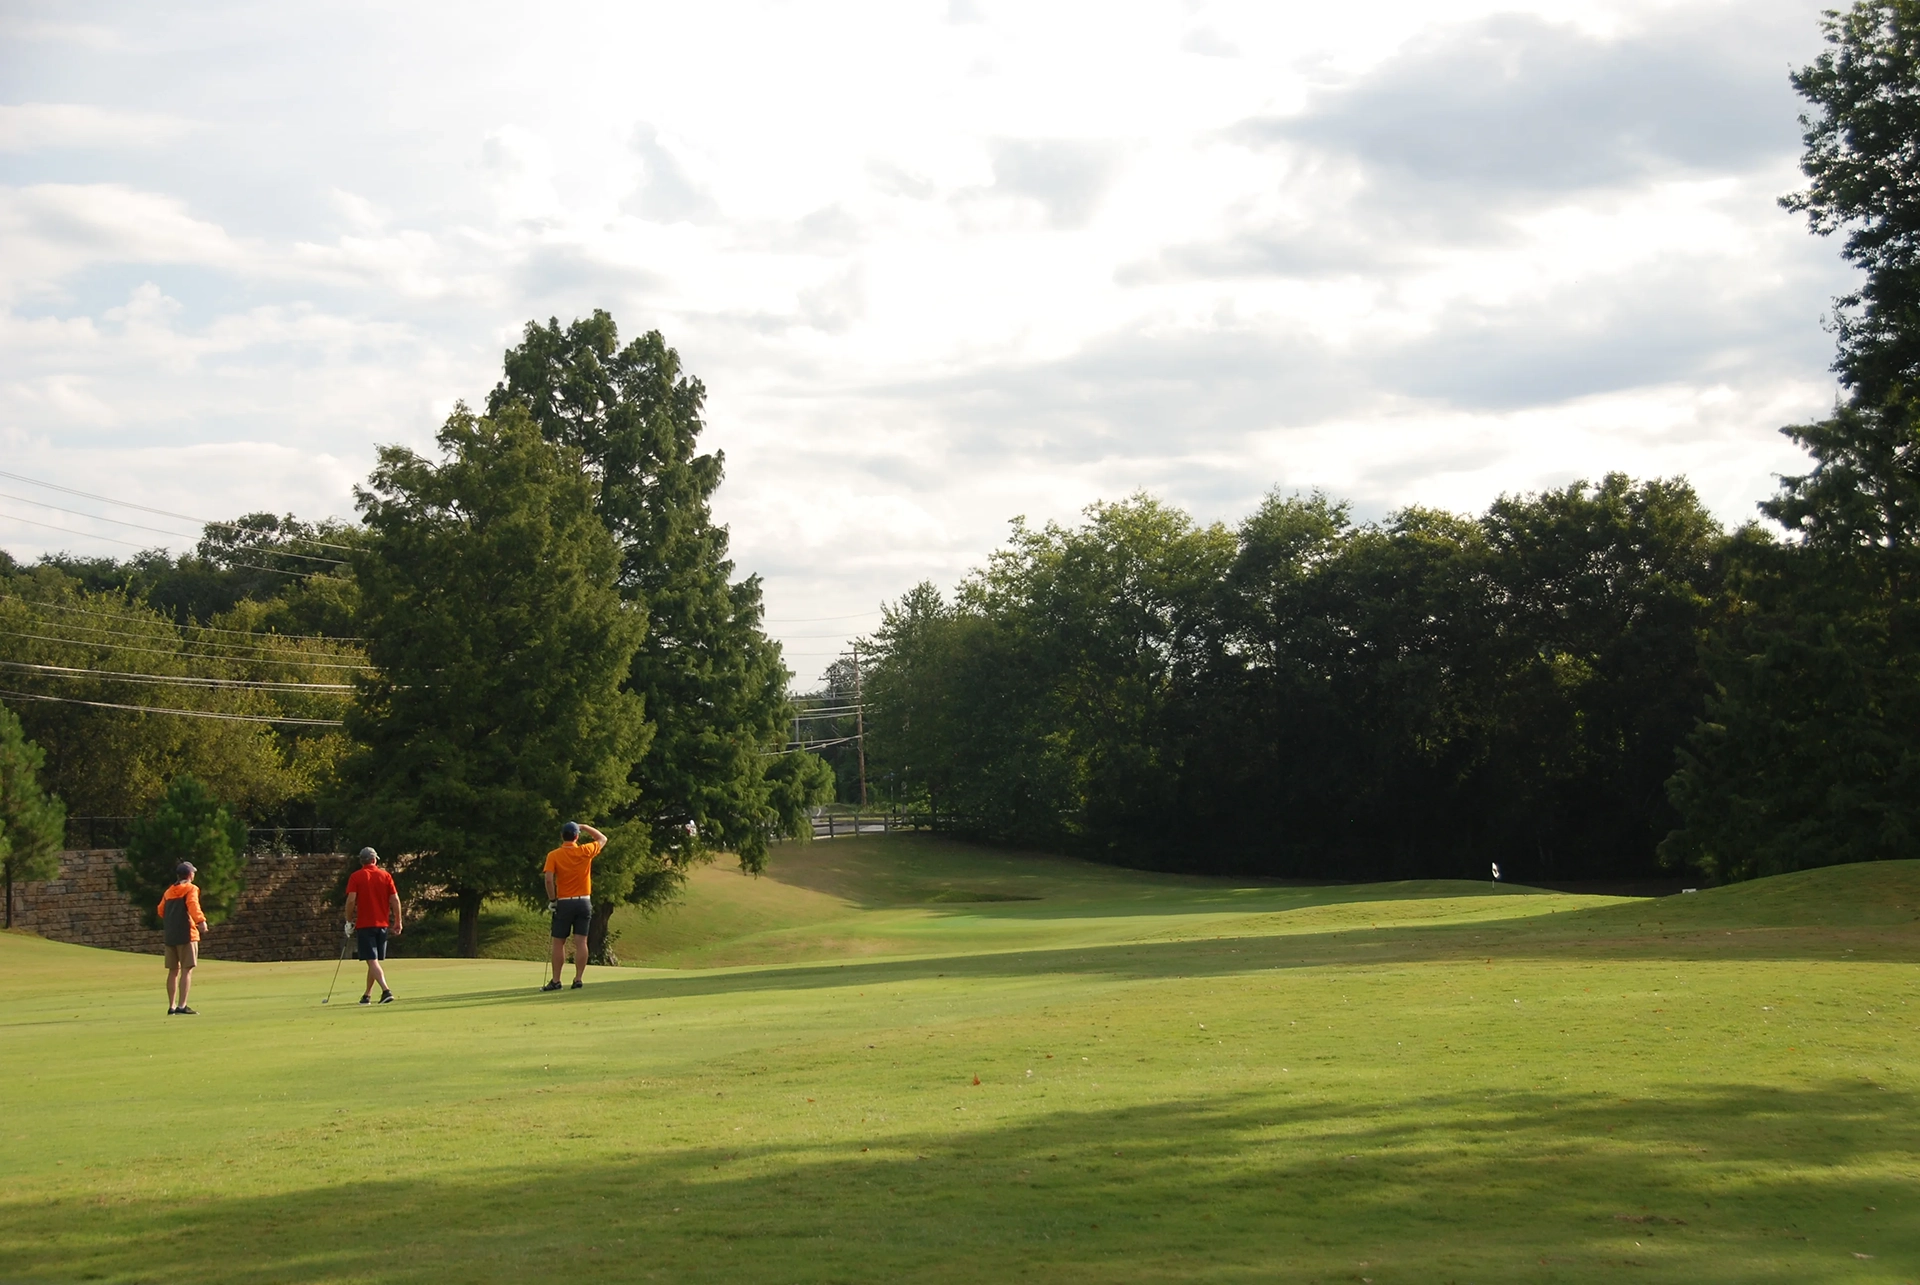 Three people are standing on a golf course, with two holding clubs and one appearing to take a swing. The background includes trees and a partly cloudy sky.